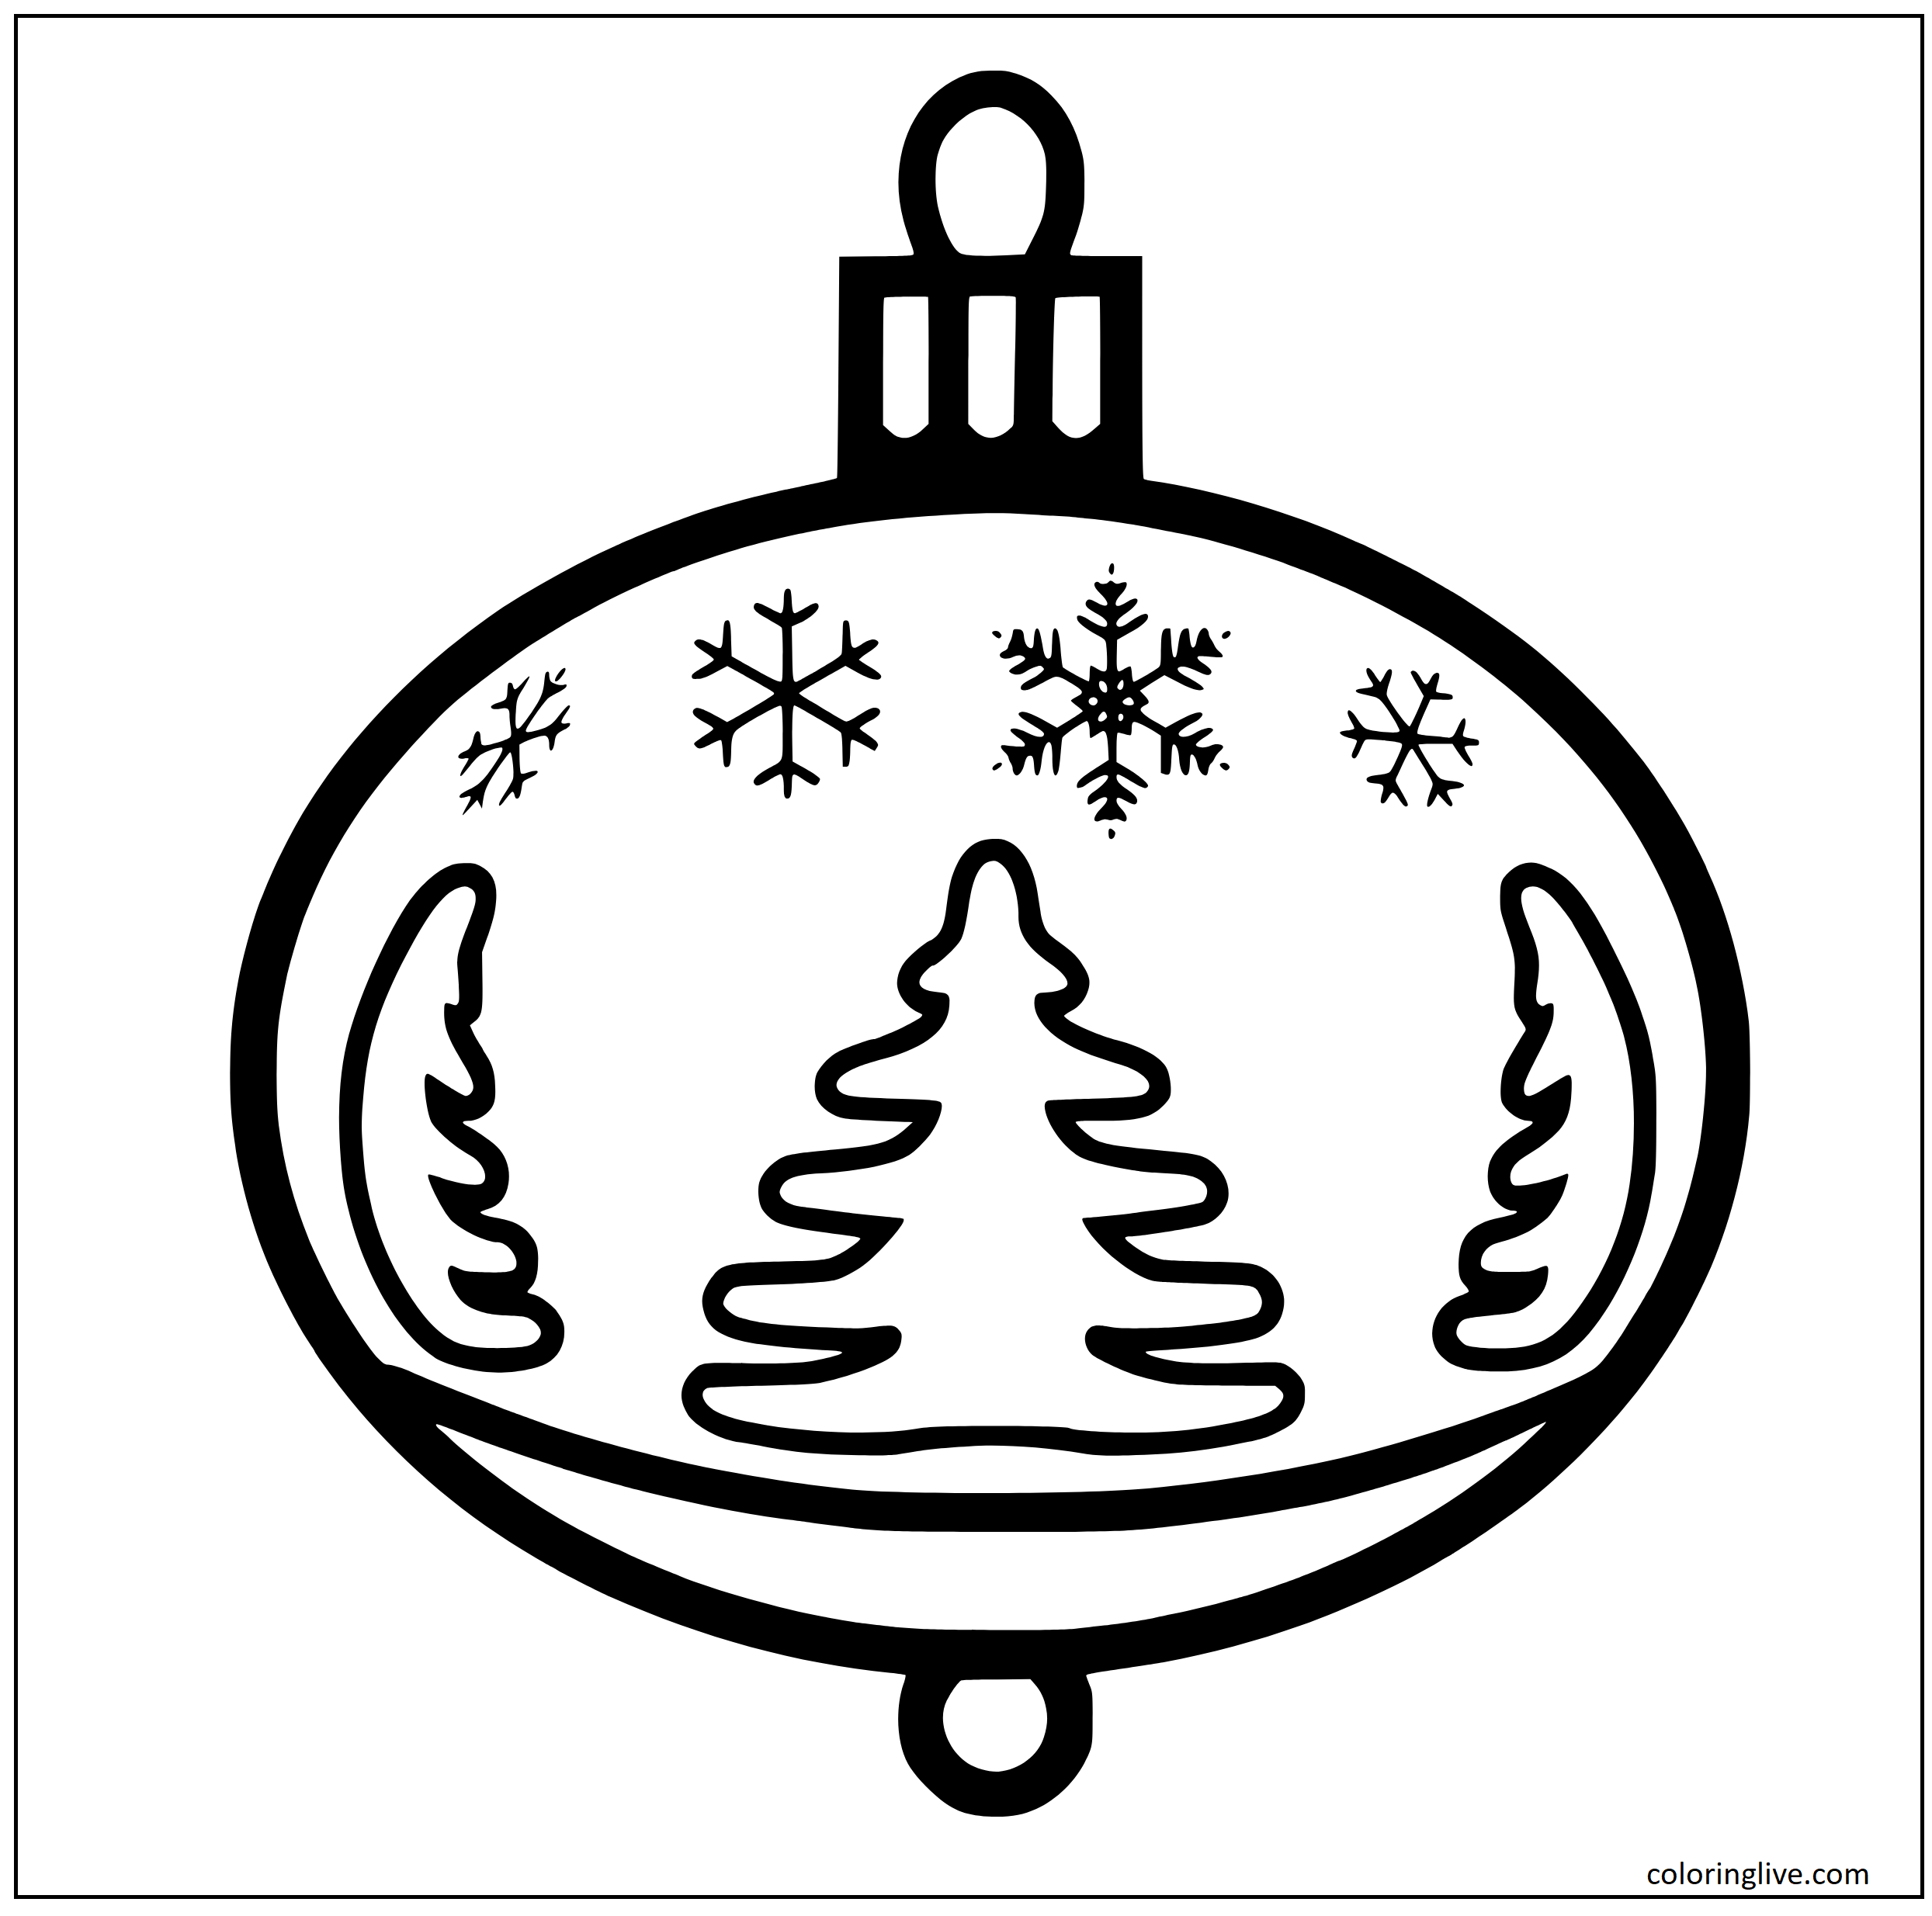 Printable Winter theme Christmas Ornament Coloring Page for kids.